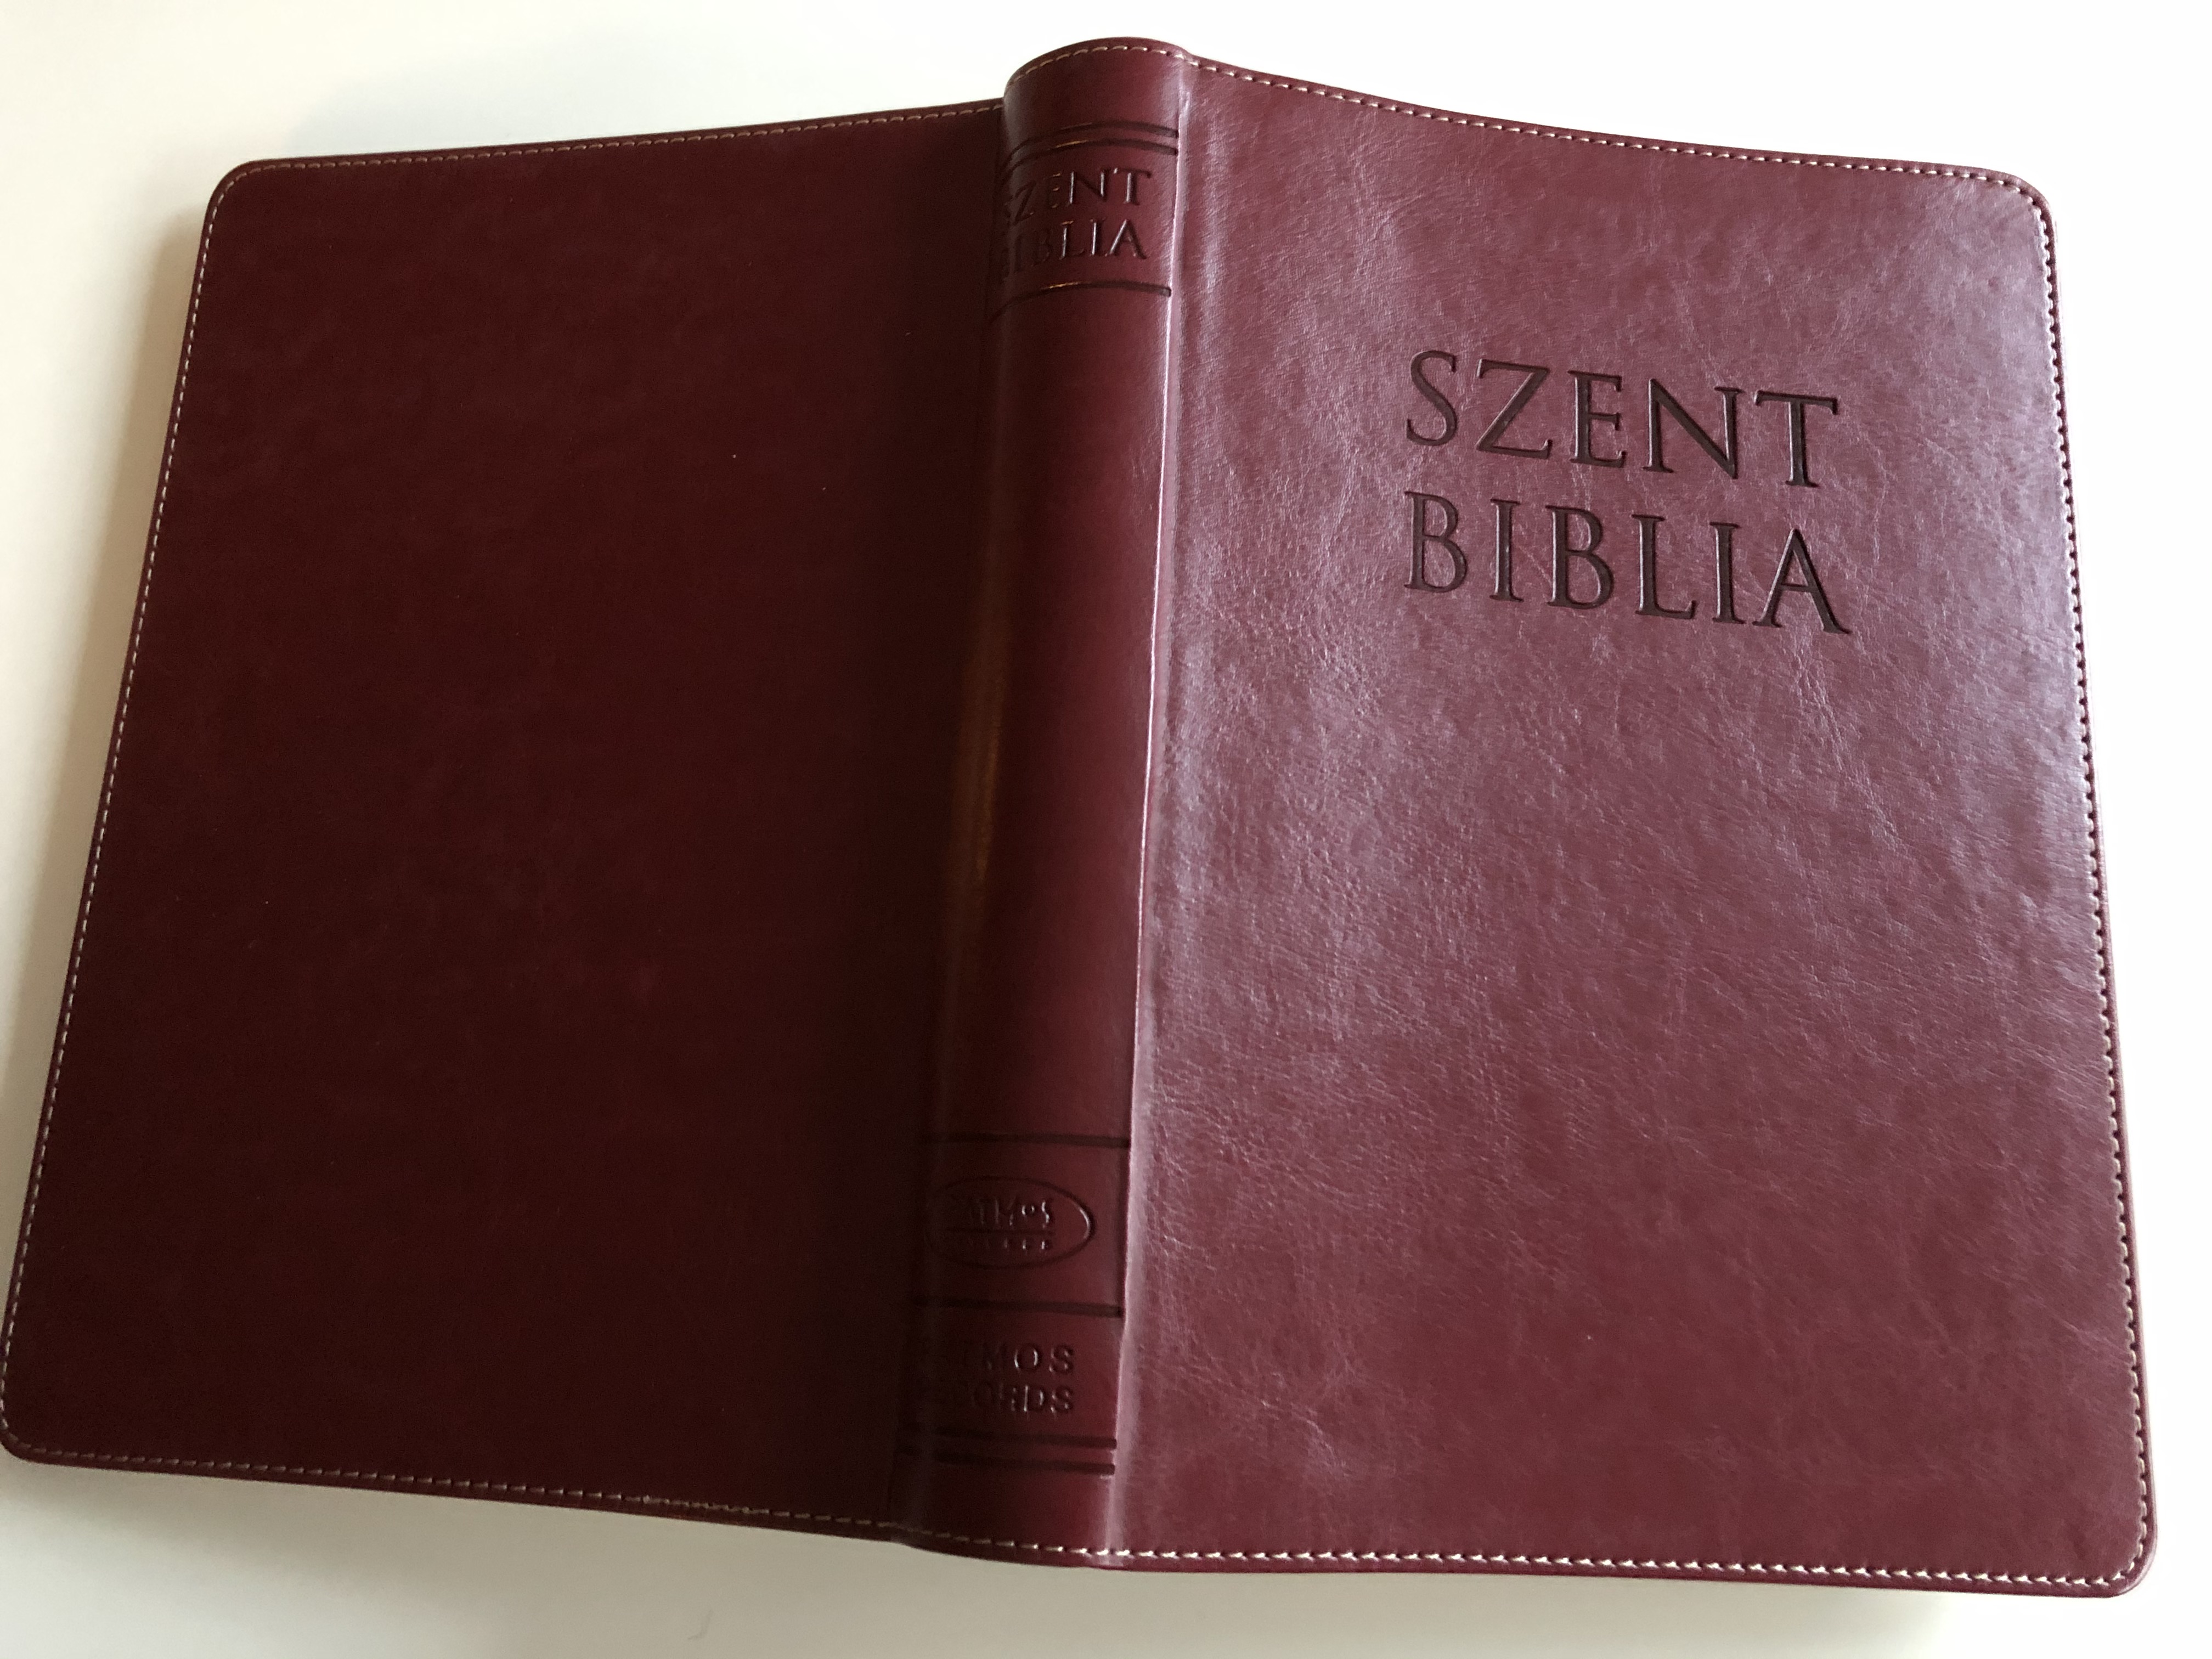 szent-biblia-hungarian-holy-bible-with-words-of-jesus-in-red-leather-bound-burgundy-cover-6-.jpg